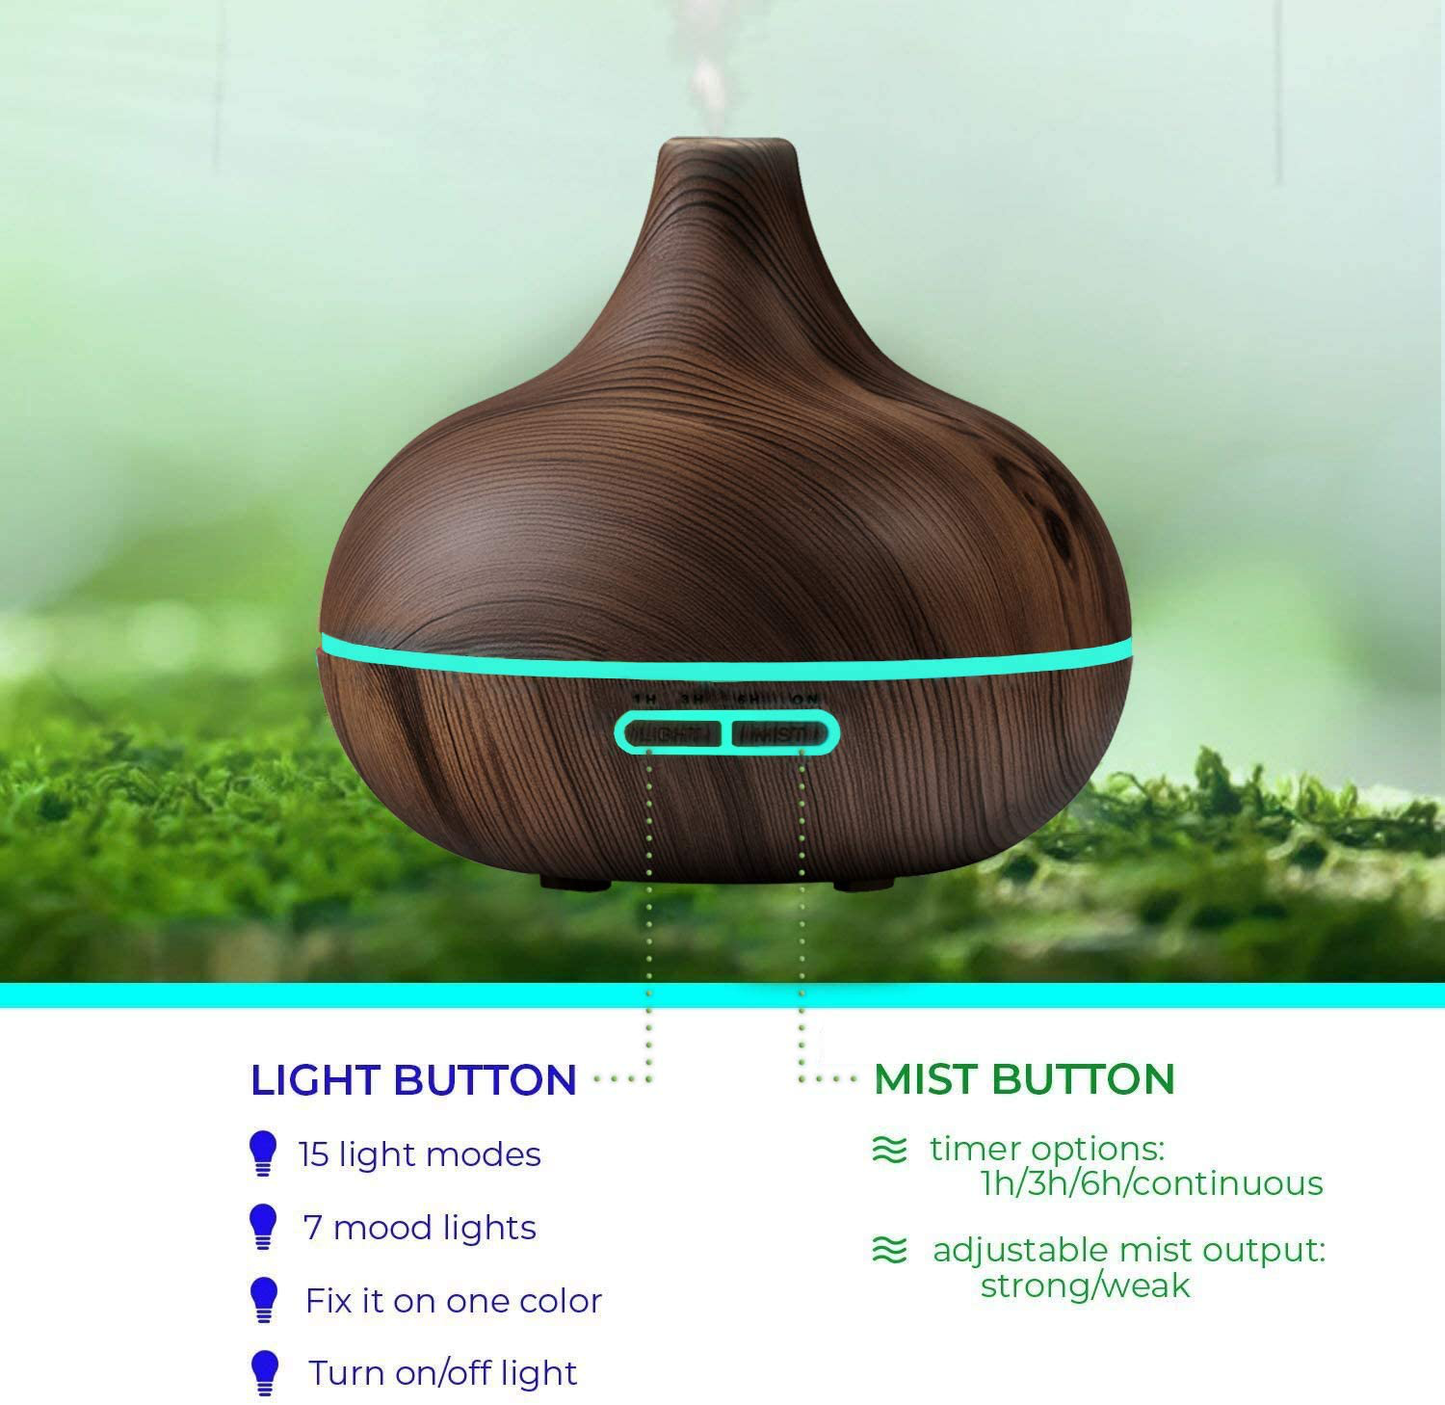 Ultimate Aromatherapy Diffuser & Essential Oil Set - Ultrasonic Diffuser & Top 10 Essential Oils - 300Ml Diffuser with 4 Timer & 7 Ambient Light Settings - Therapeutic Grade Essential Oils - Dark Oak…